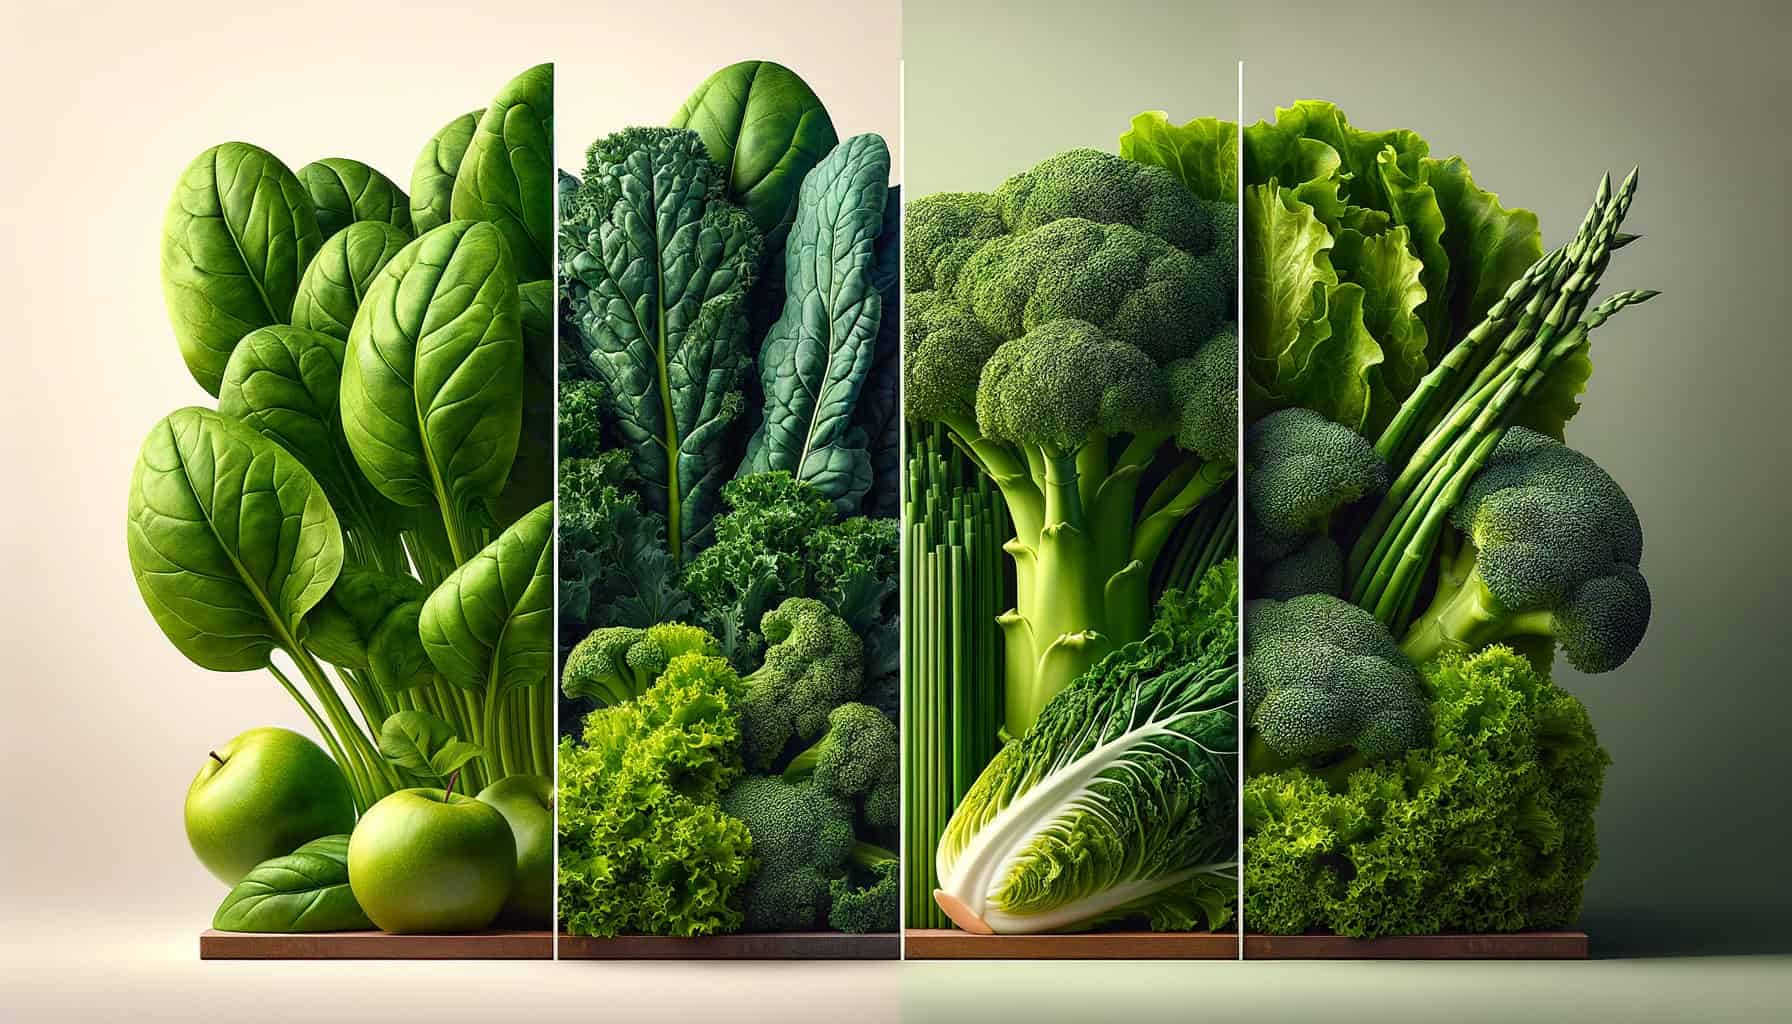 Four types of low-carb vegetables_ spinach, kale, lettuce, and broccoli